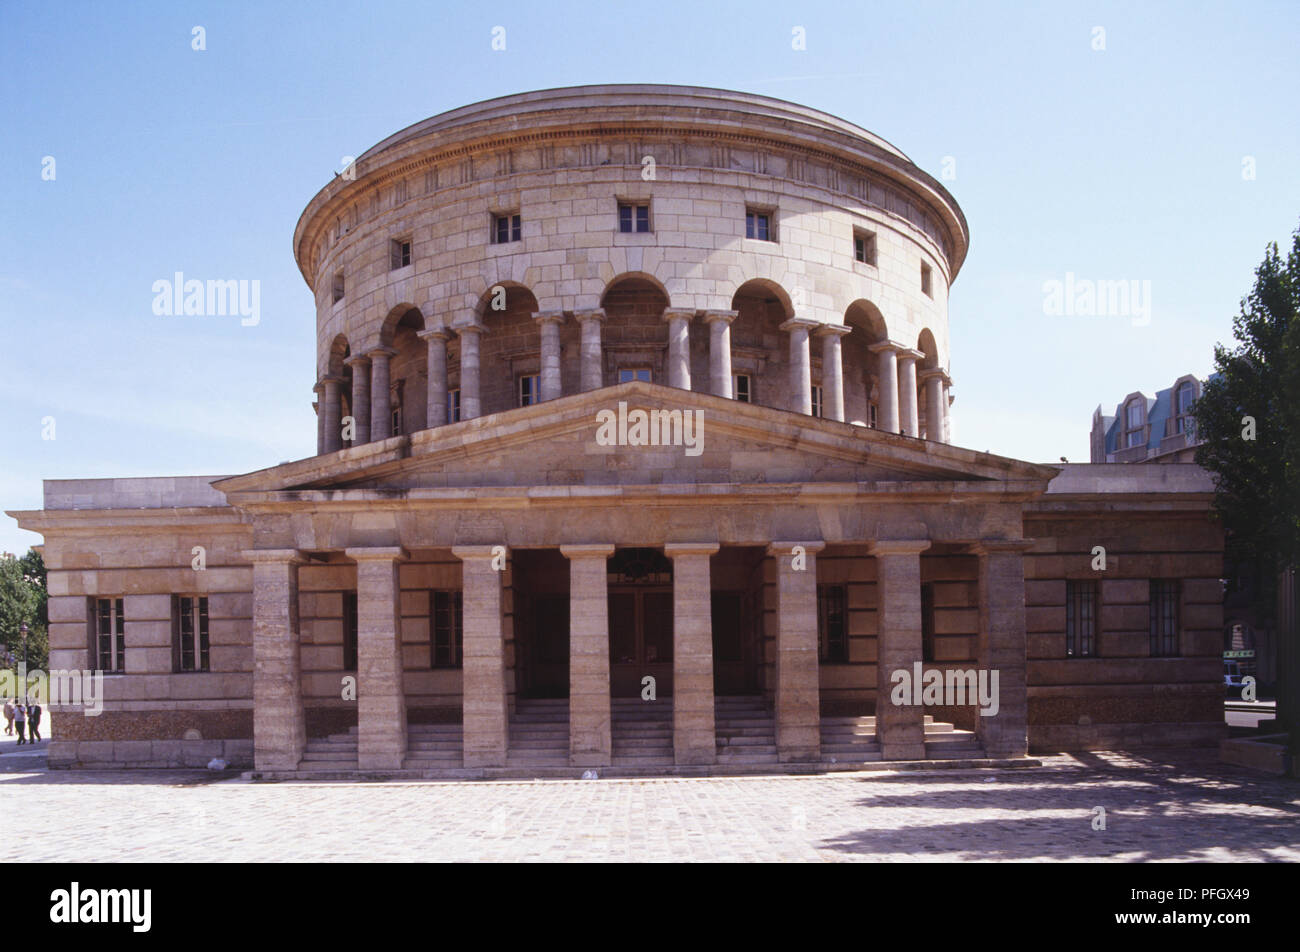 France, Paris, Barriere de la Villette, with stone columns and round dome, tollhouse with circular upper storey and arched portico. Stock Photo